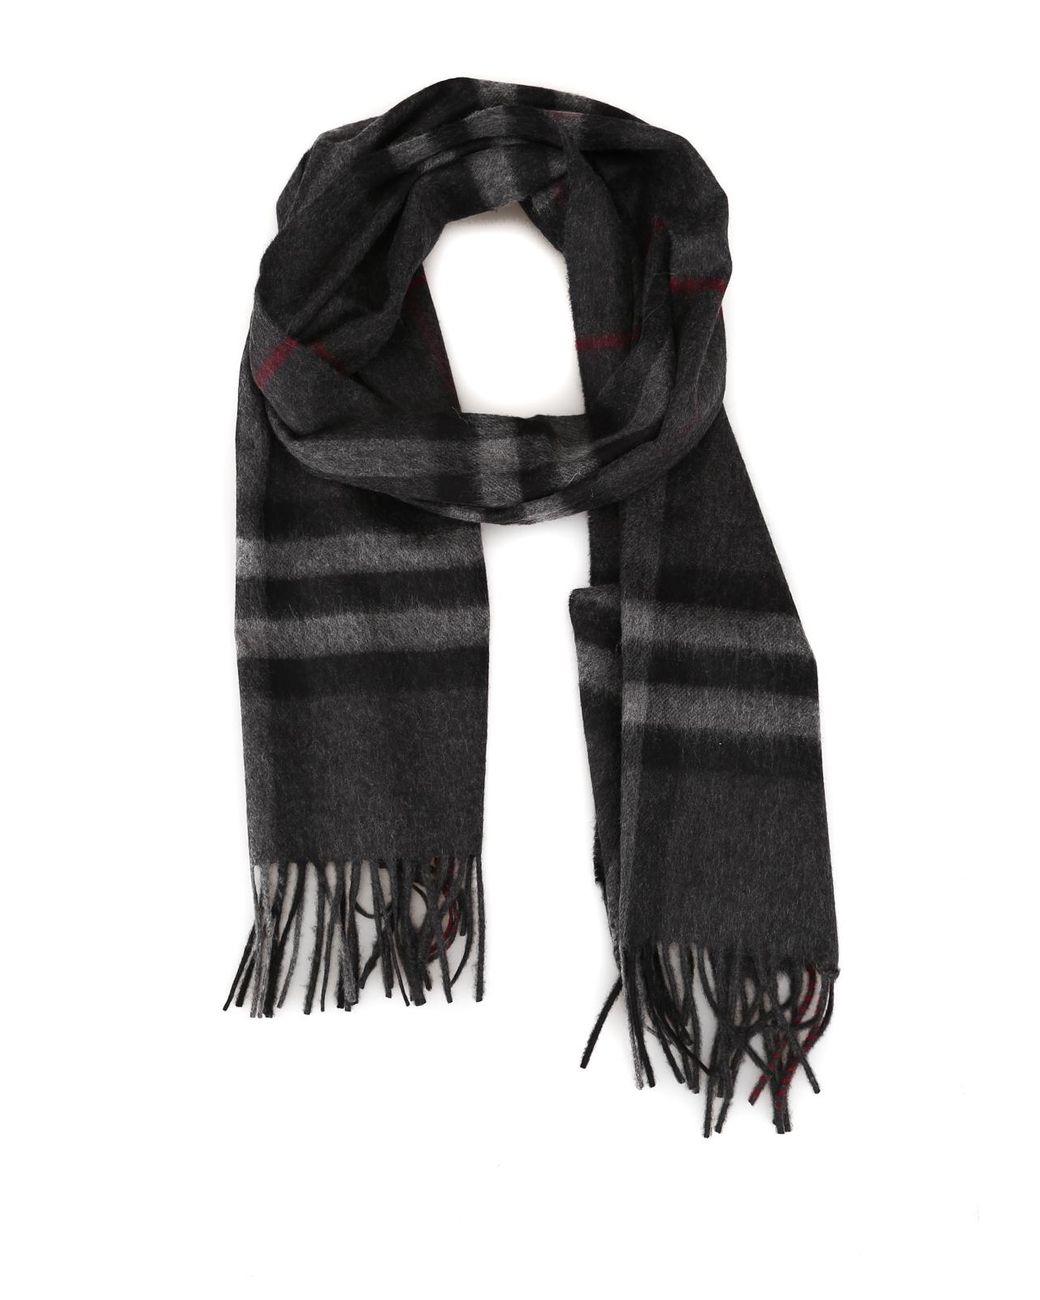 Burberry Check Patterned Cashmere Scarf in Dark Grey (Gray) for Men - Lyst